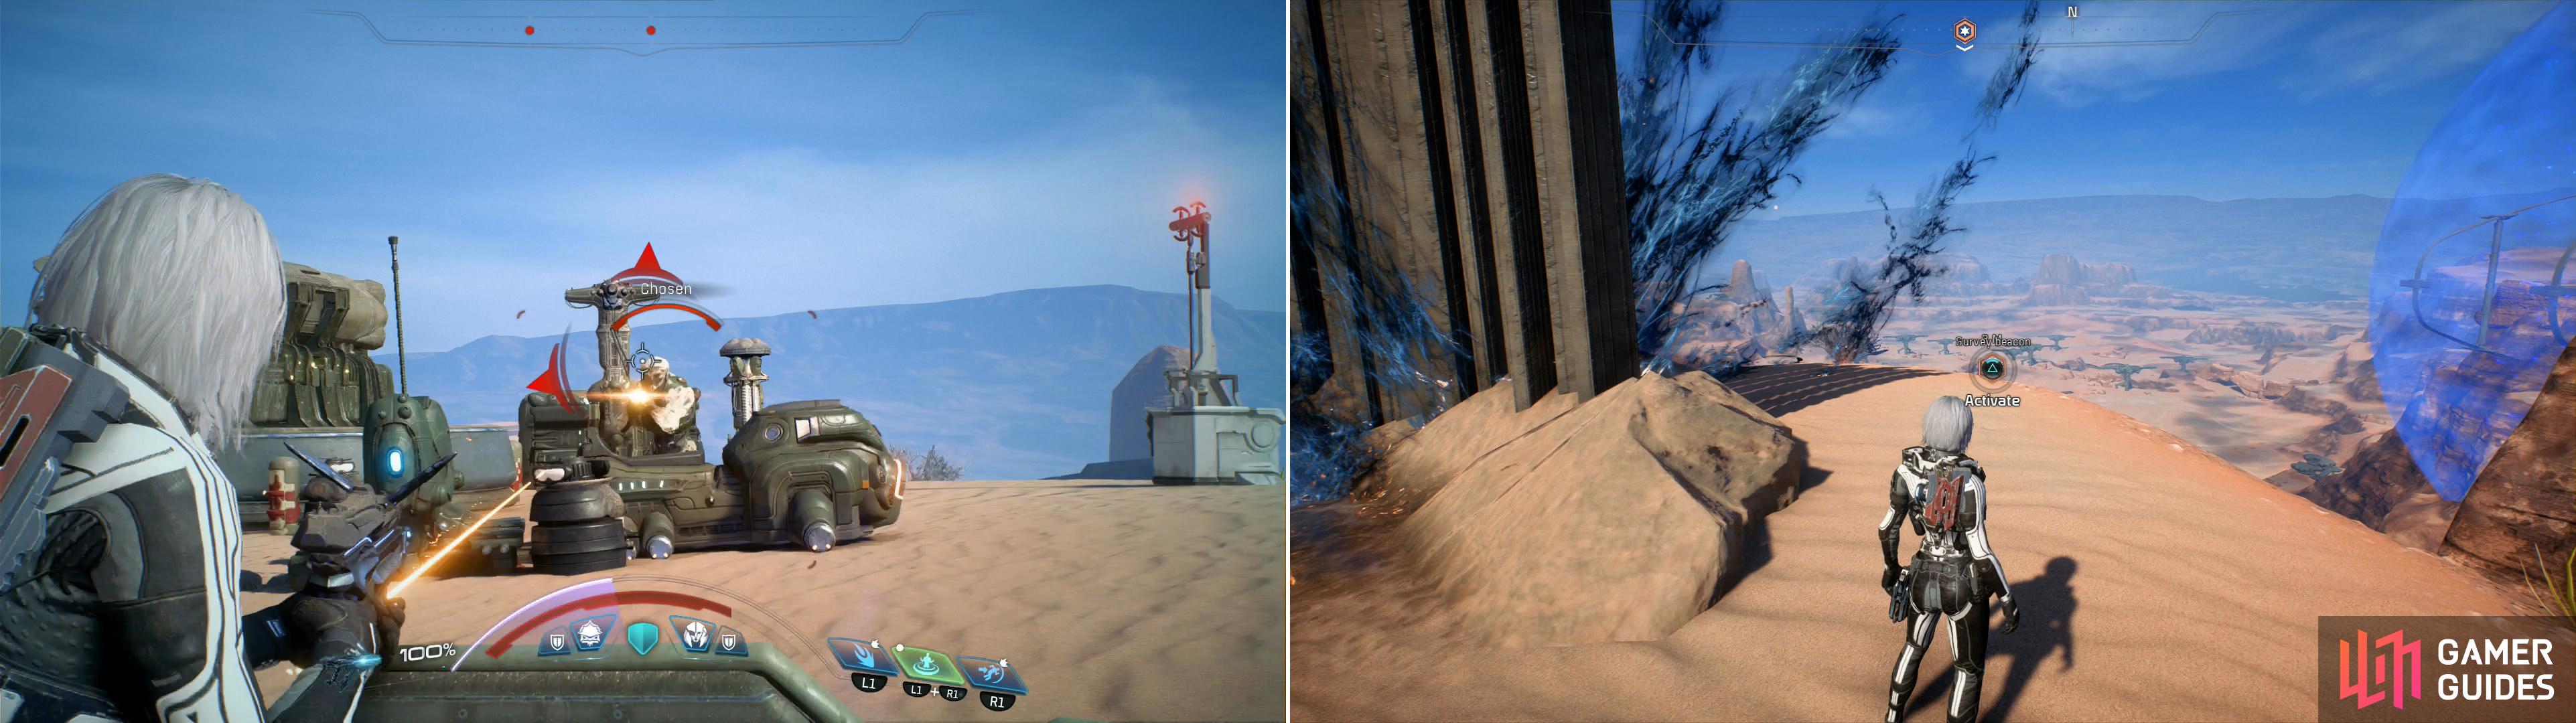 Defeat whatever foes impede your progress - one beacon is near a Kett camp (left) while another is near some Scourge-plagued Remnant ruins (right).